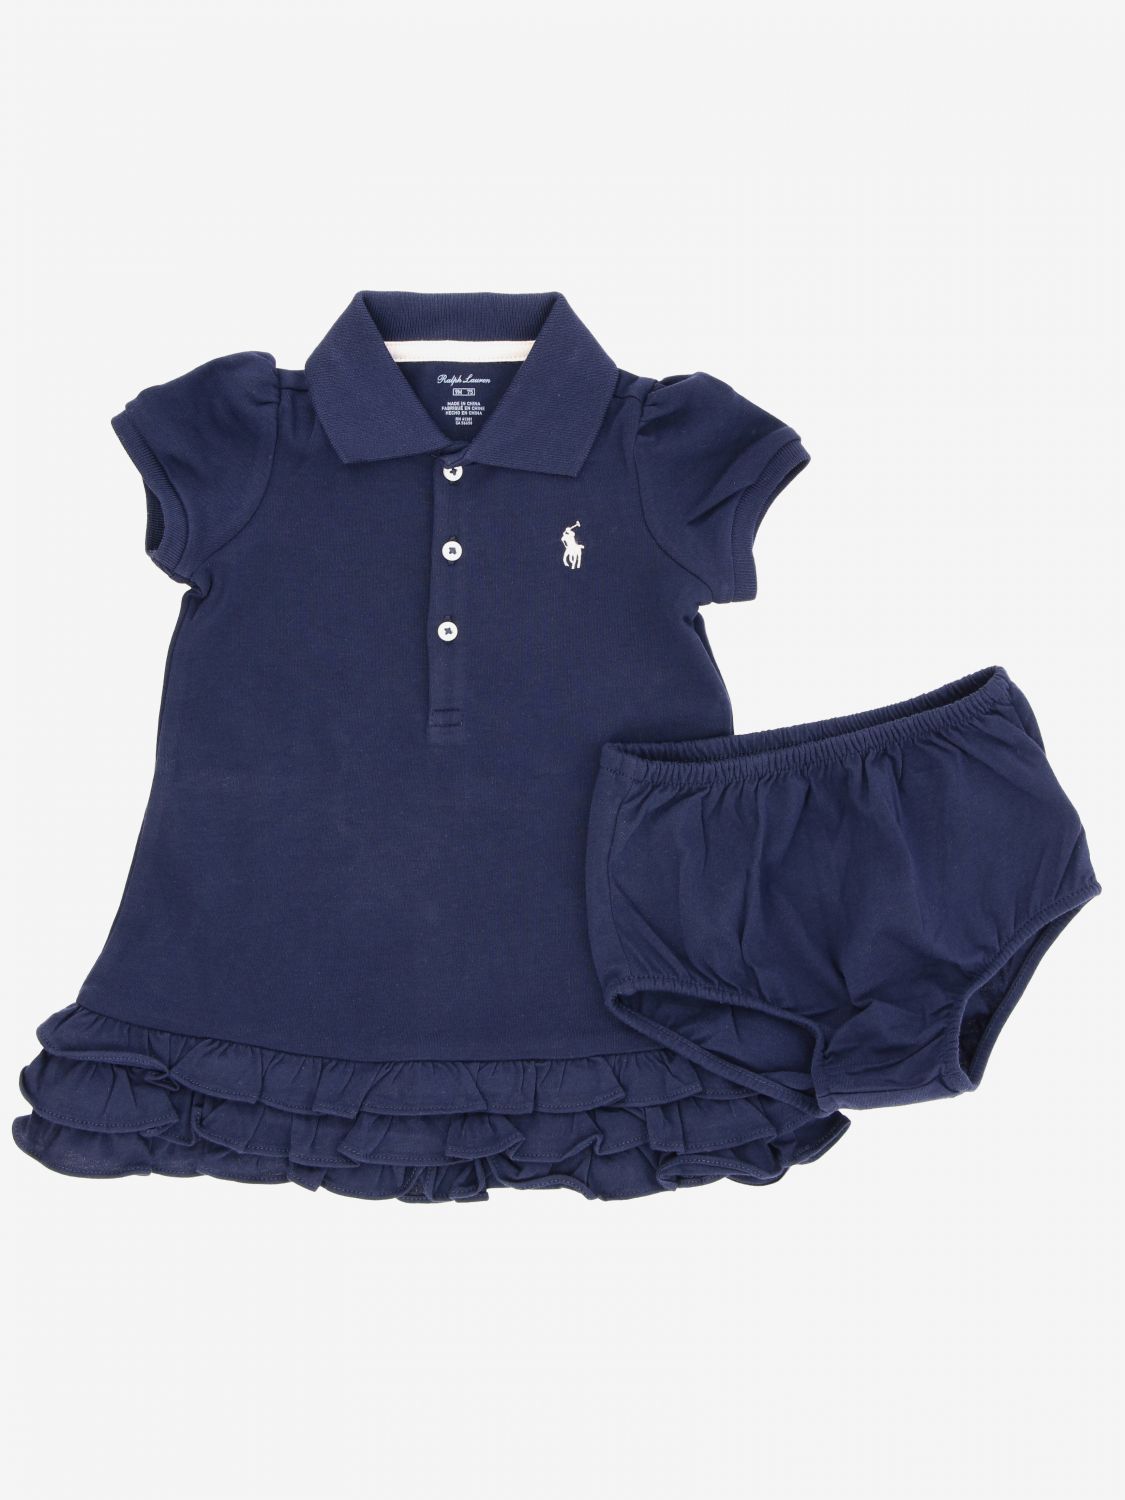 Polo Ralph Lauren Infant dress with 